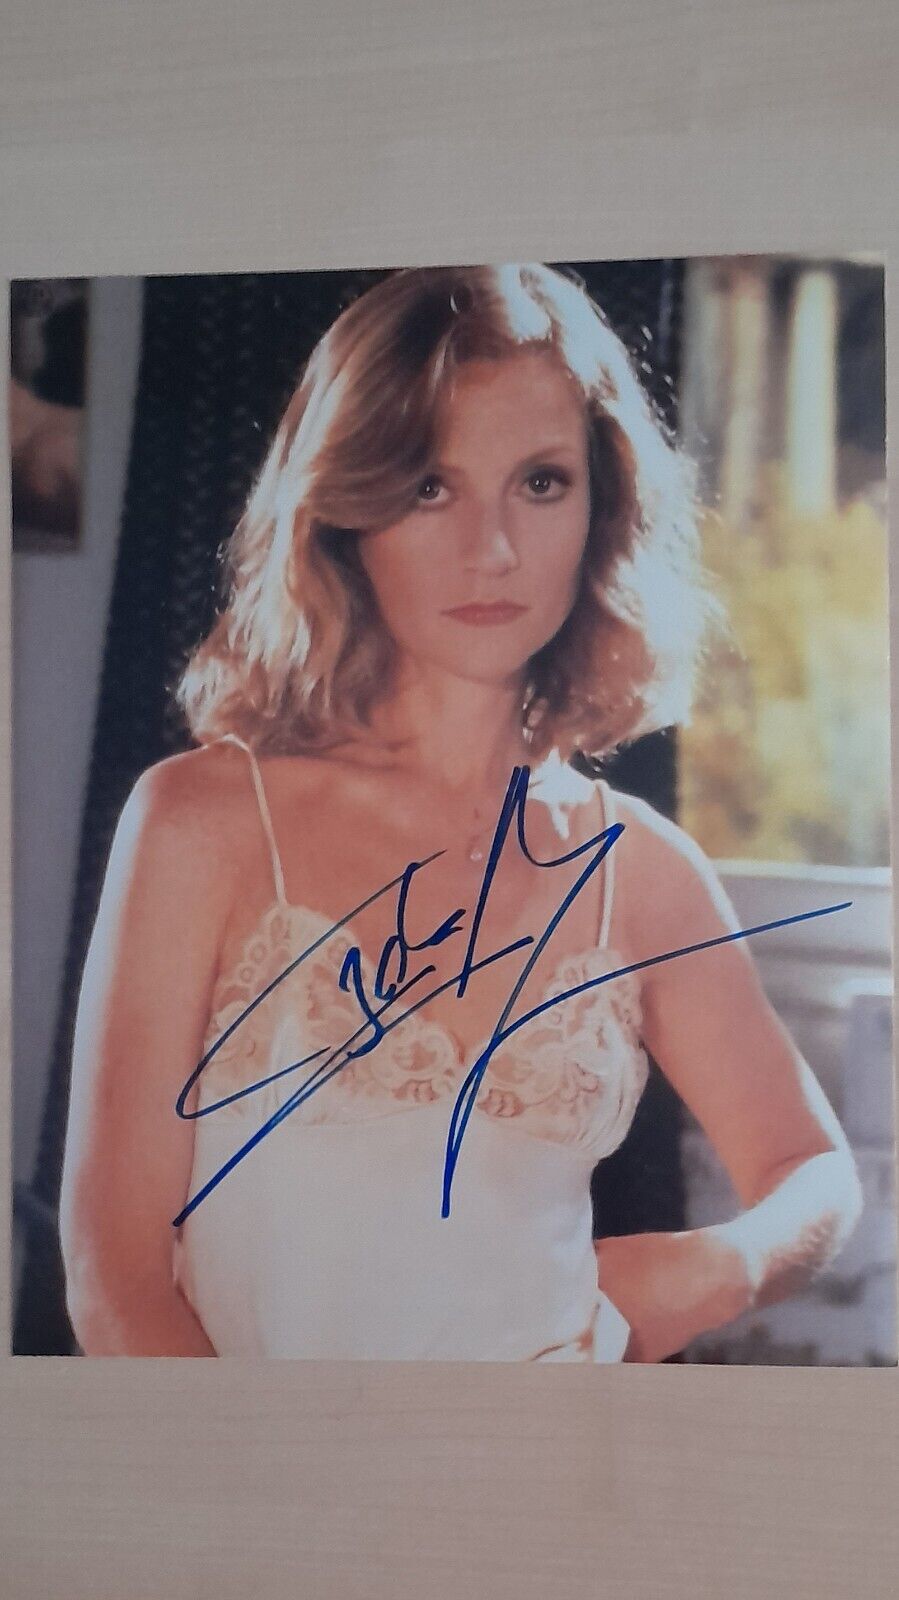 ISABELLE HUPPERT photo 27x20cm signed - very sexy AUTHENTIC AUTOGRAPH - 